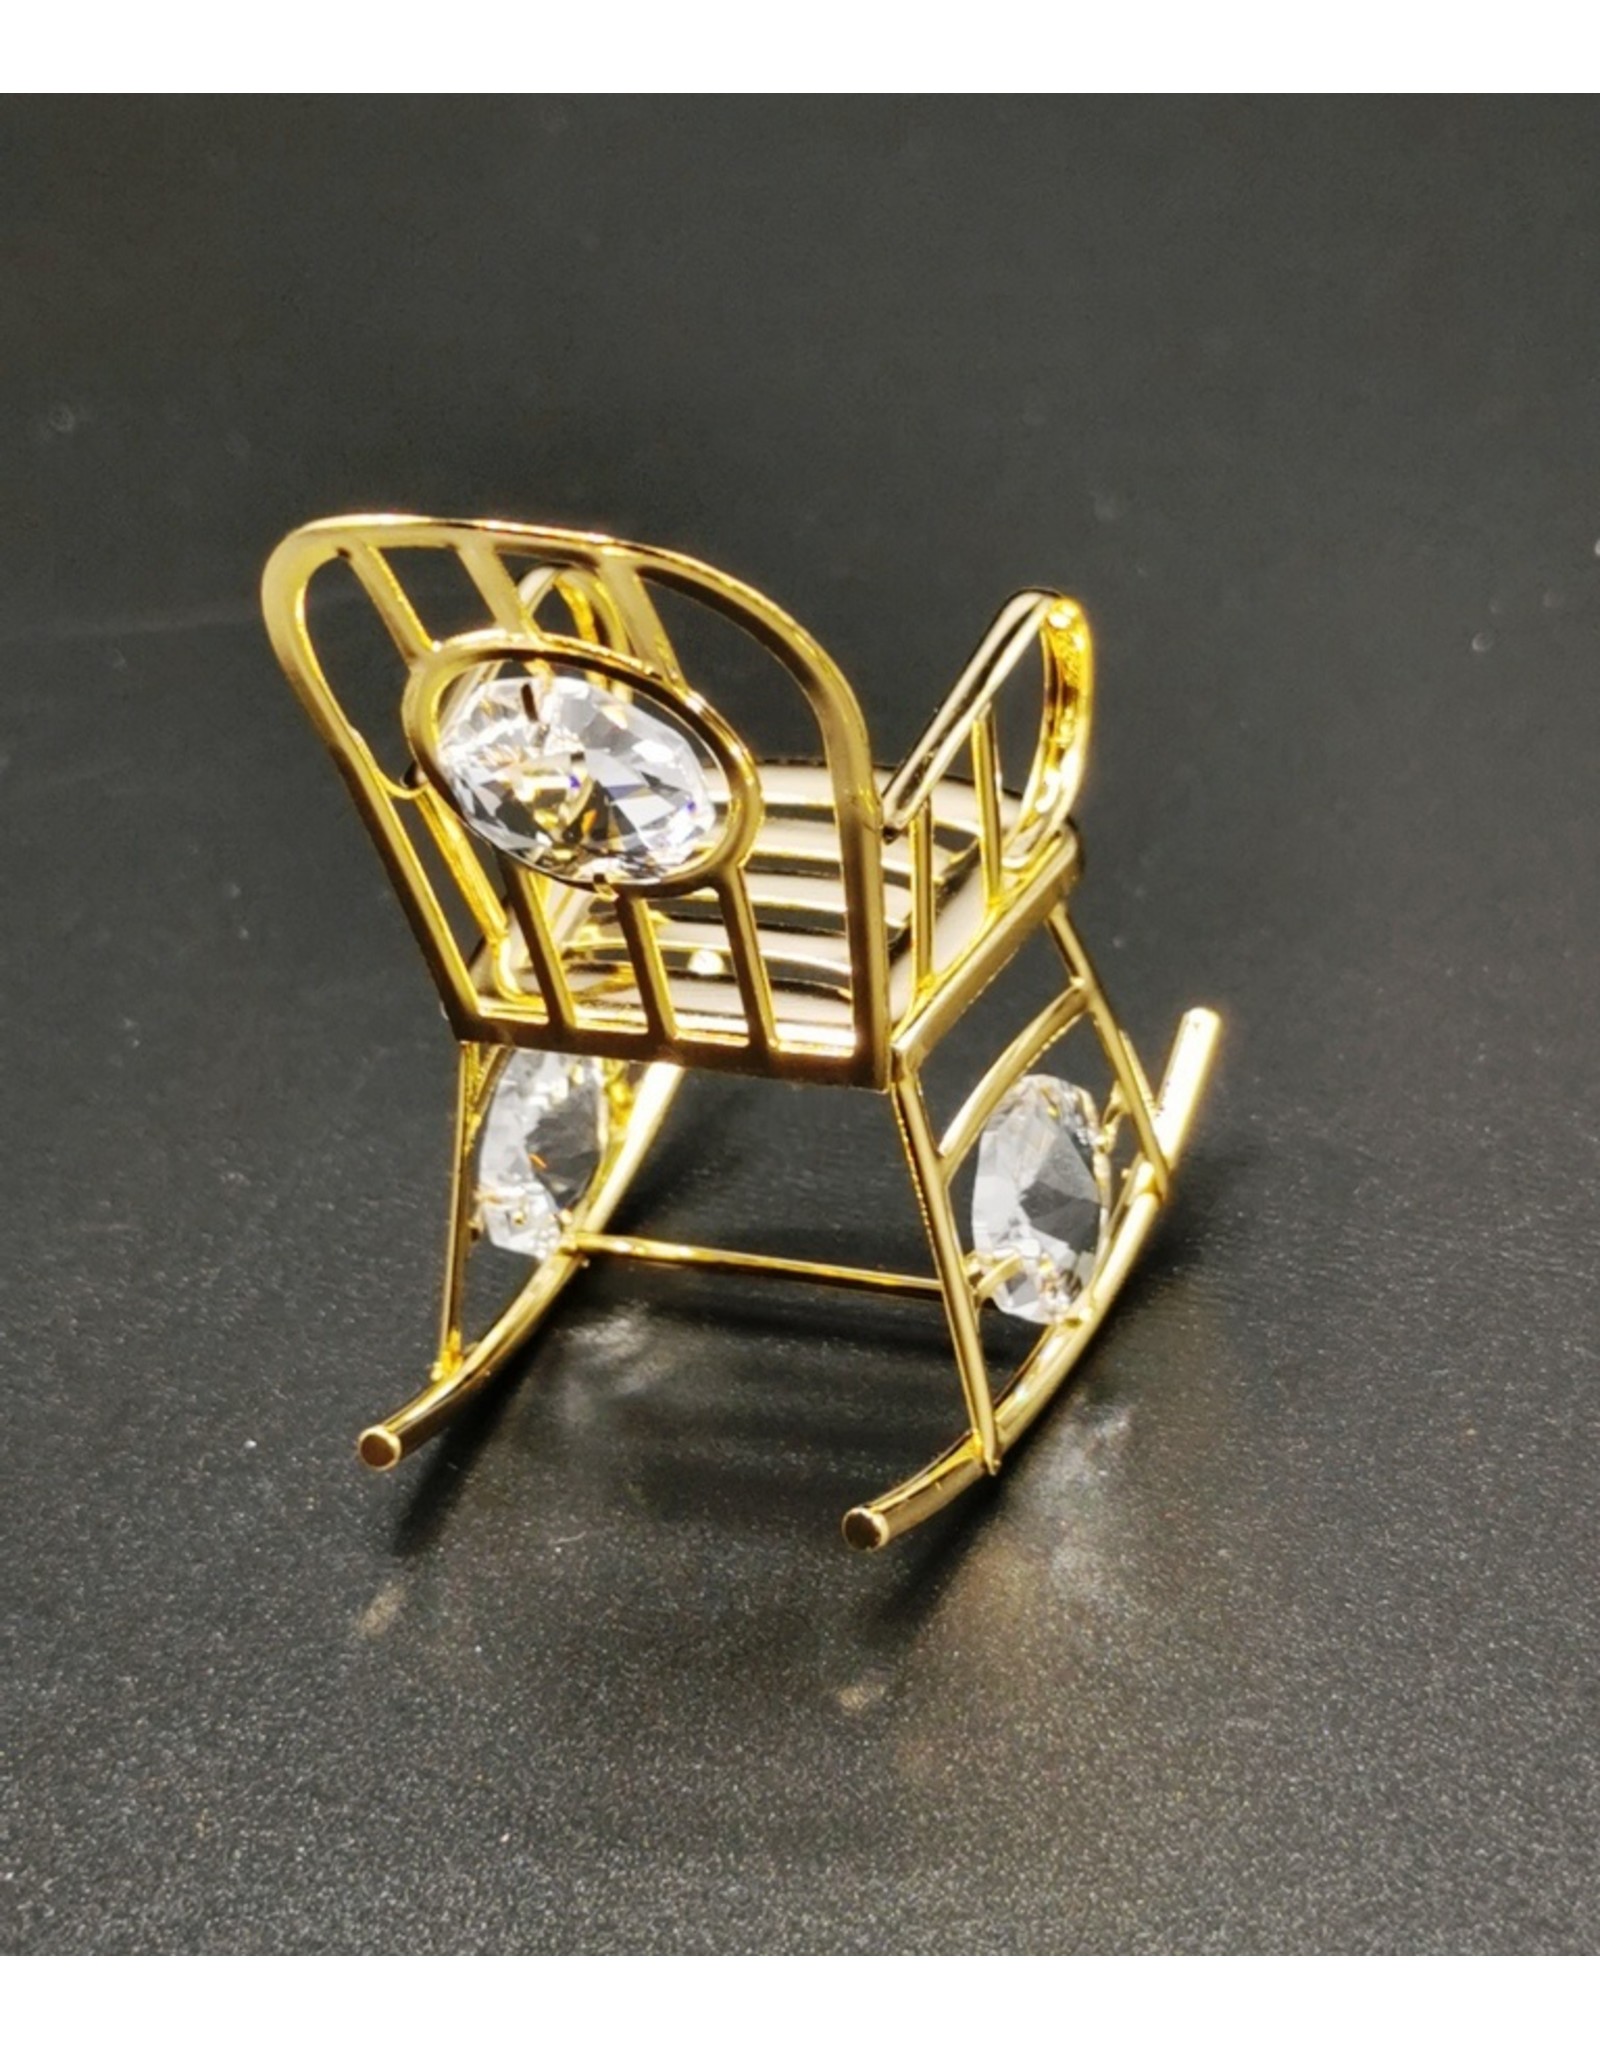 Crystal Temptations Miscellaneous - Miniature Rocking chair. Gold-plated and with Swarovski